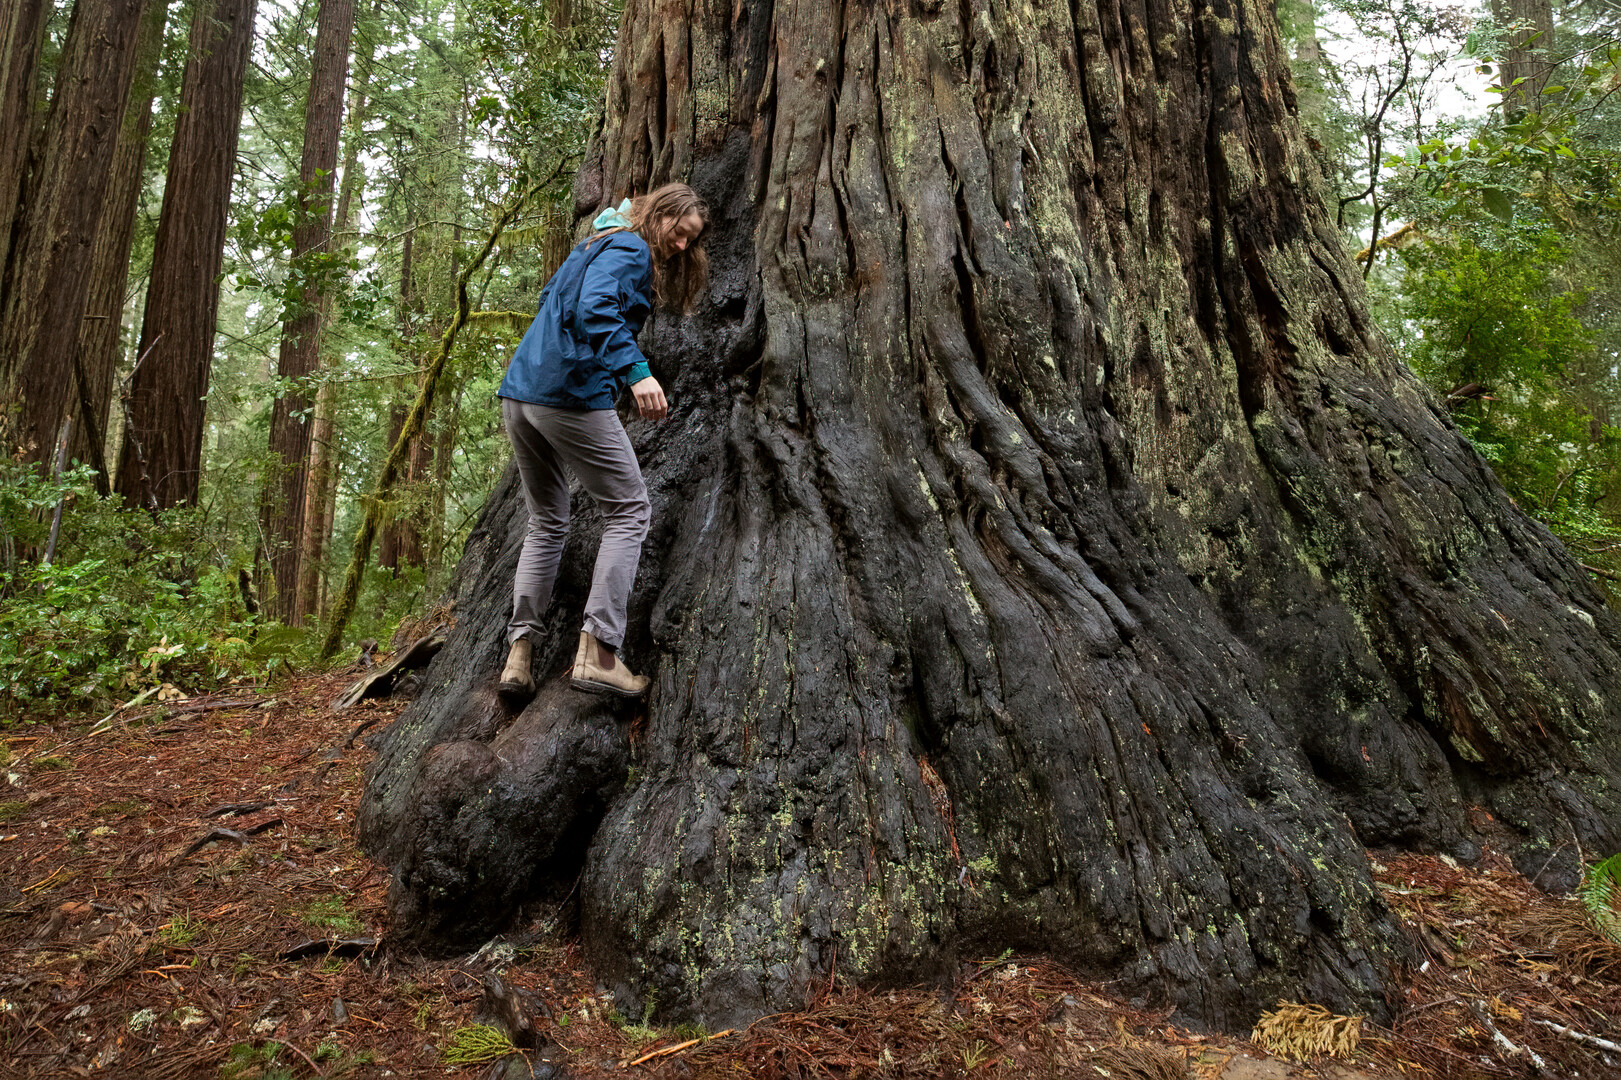 Audra Burral '23 climbing a tree in Redwoods National Park during her spring break road trip with Outdoor Ed on March 25, 2023. Photo by Mila Naumovska '26.